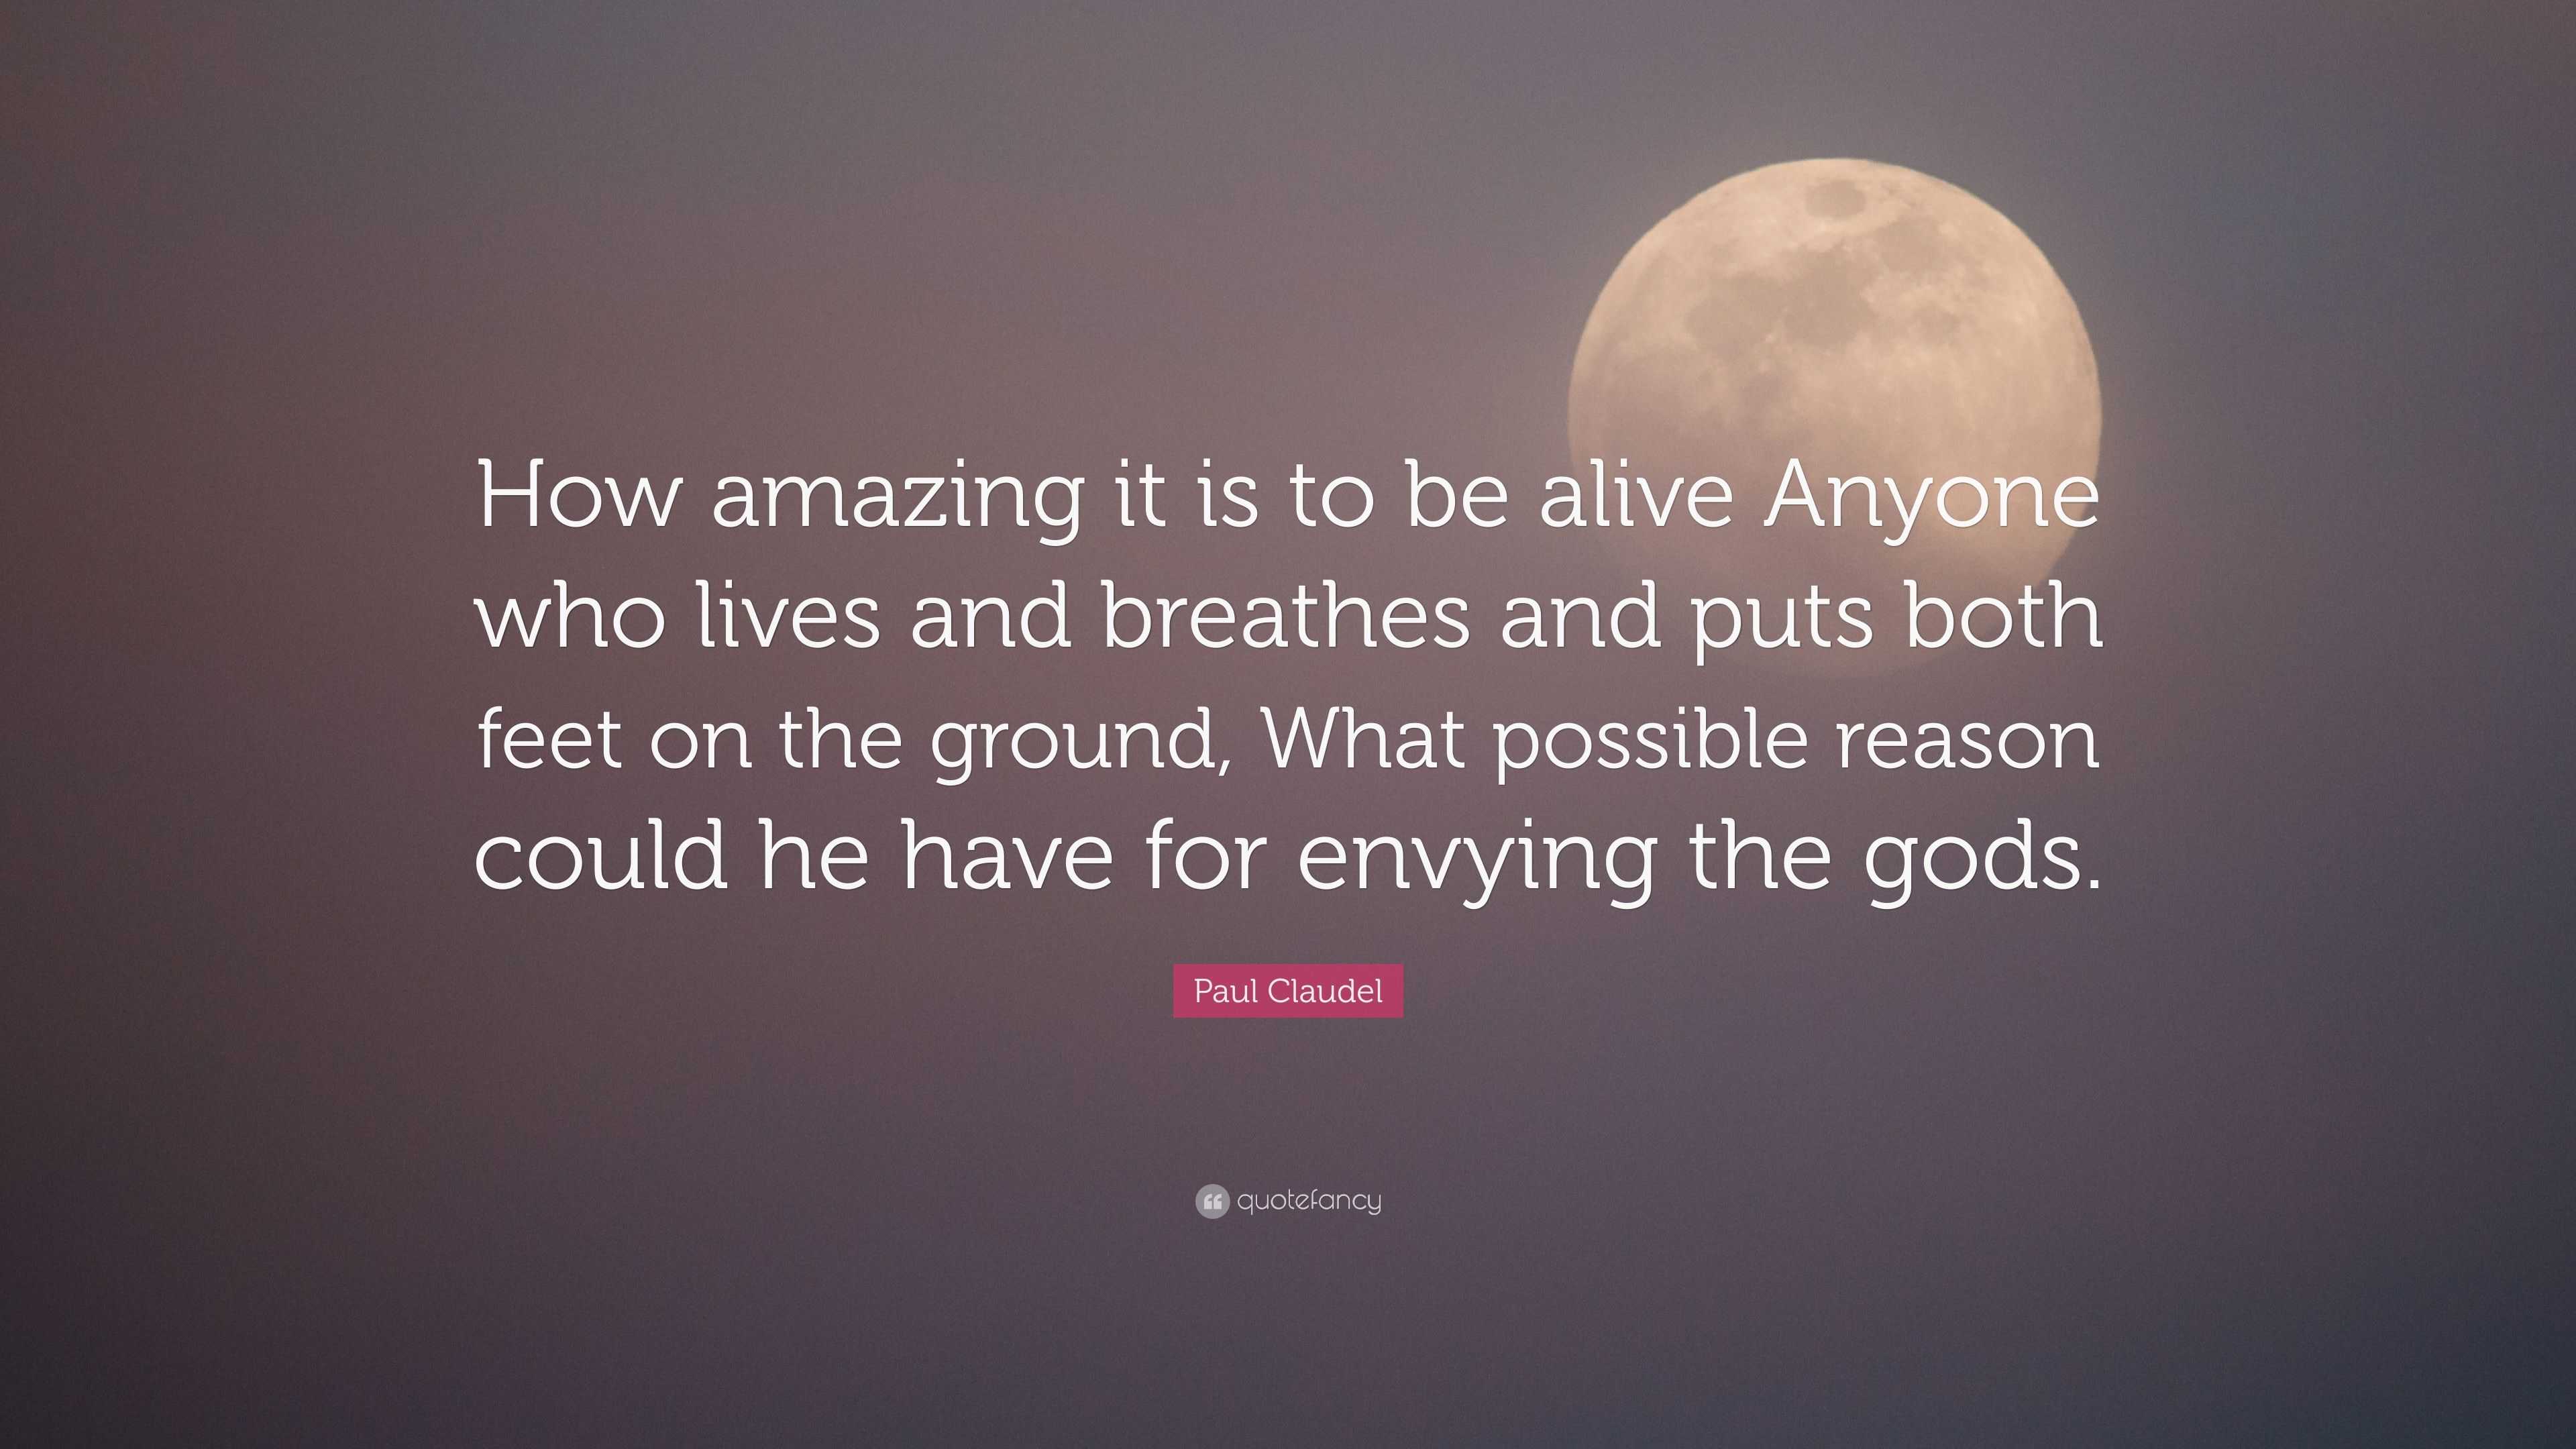 Paul Claudel Quote: “How amazing it is to be alive Anyone who lives and ...